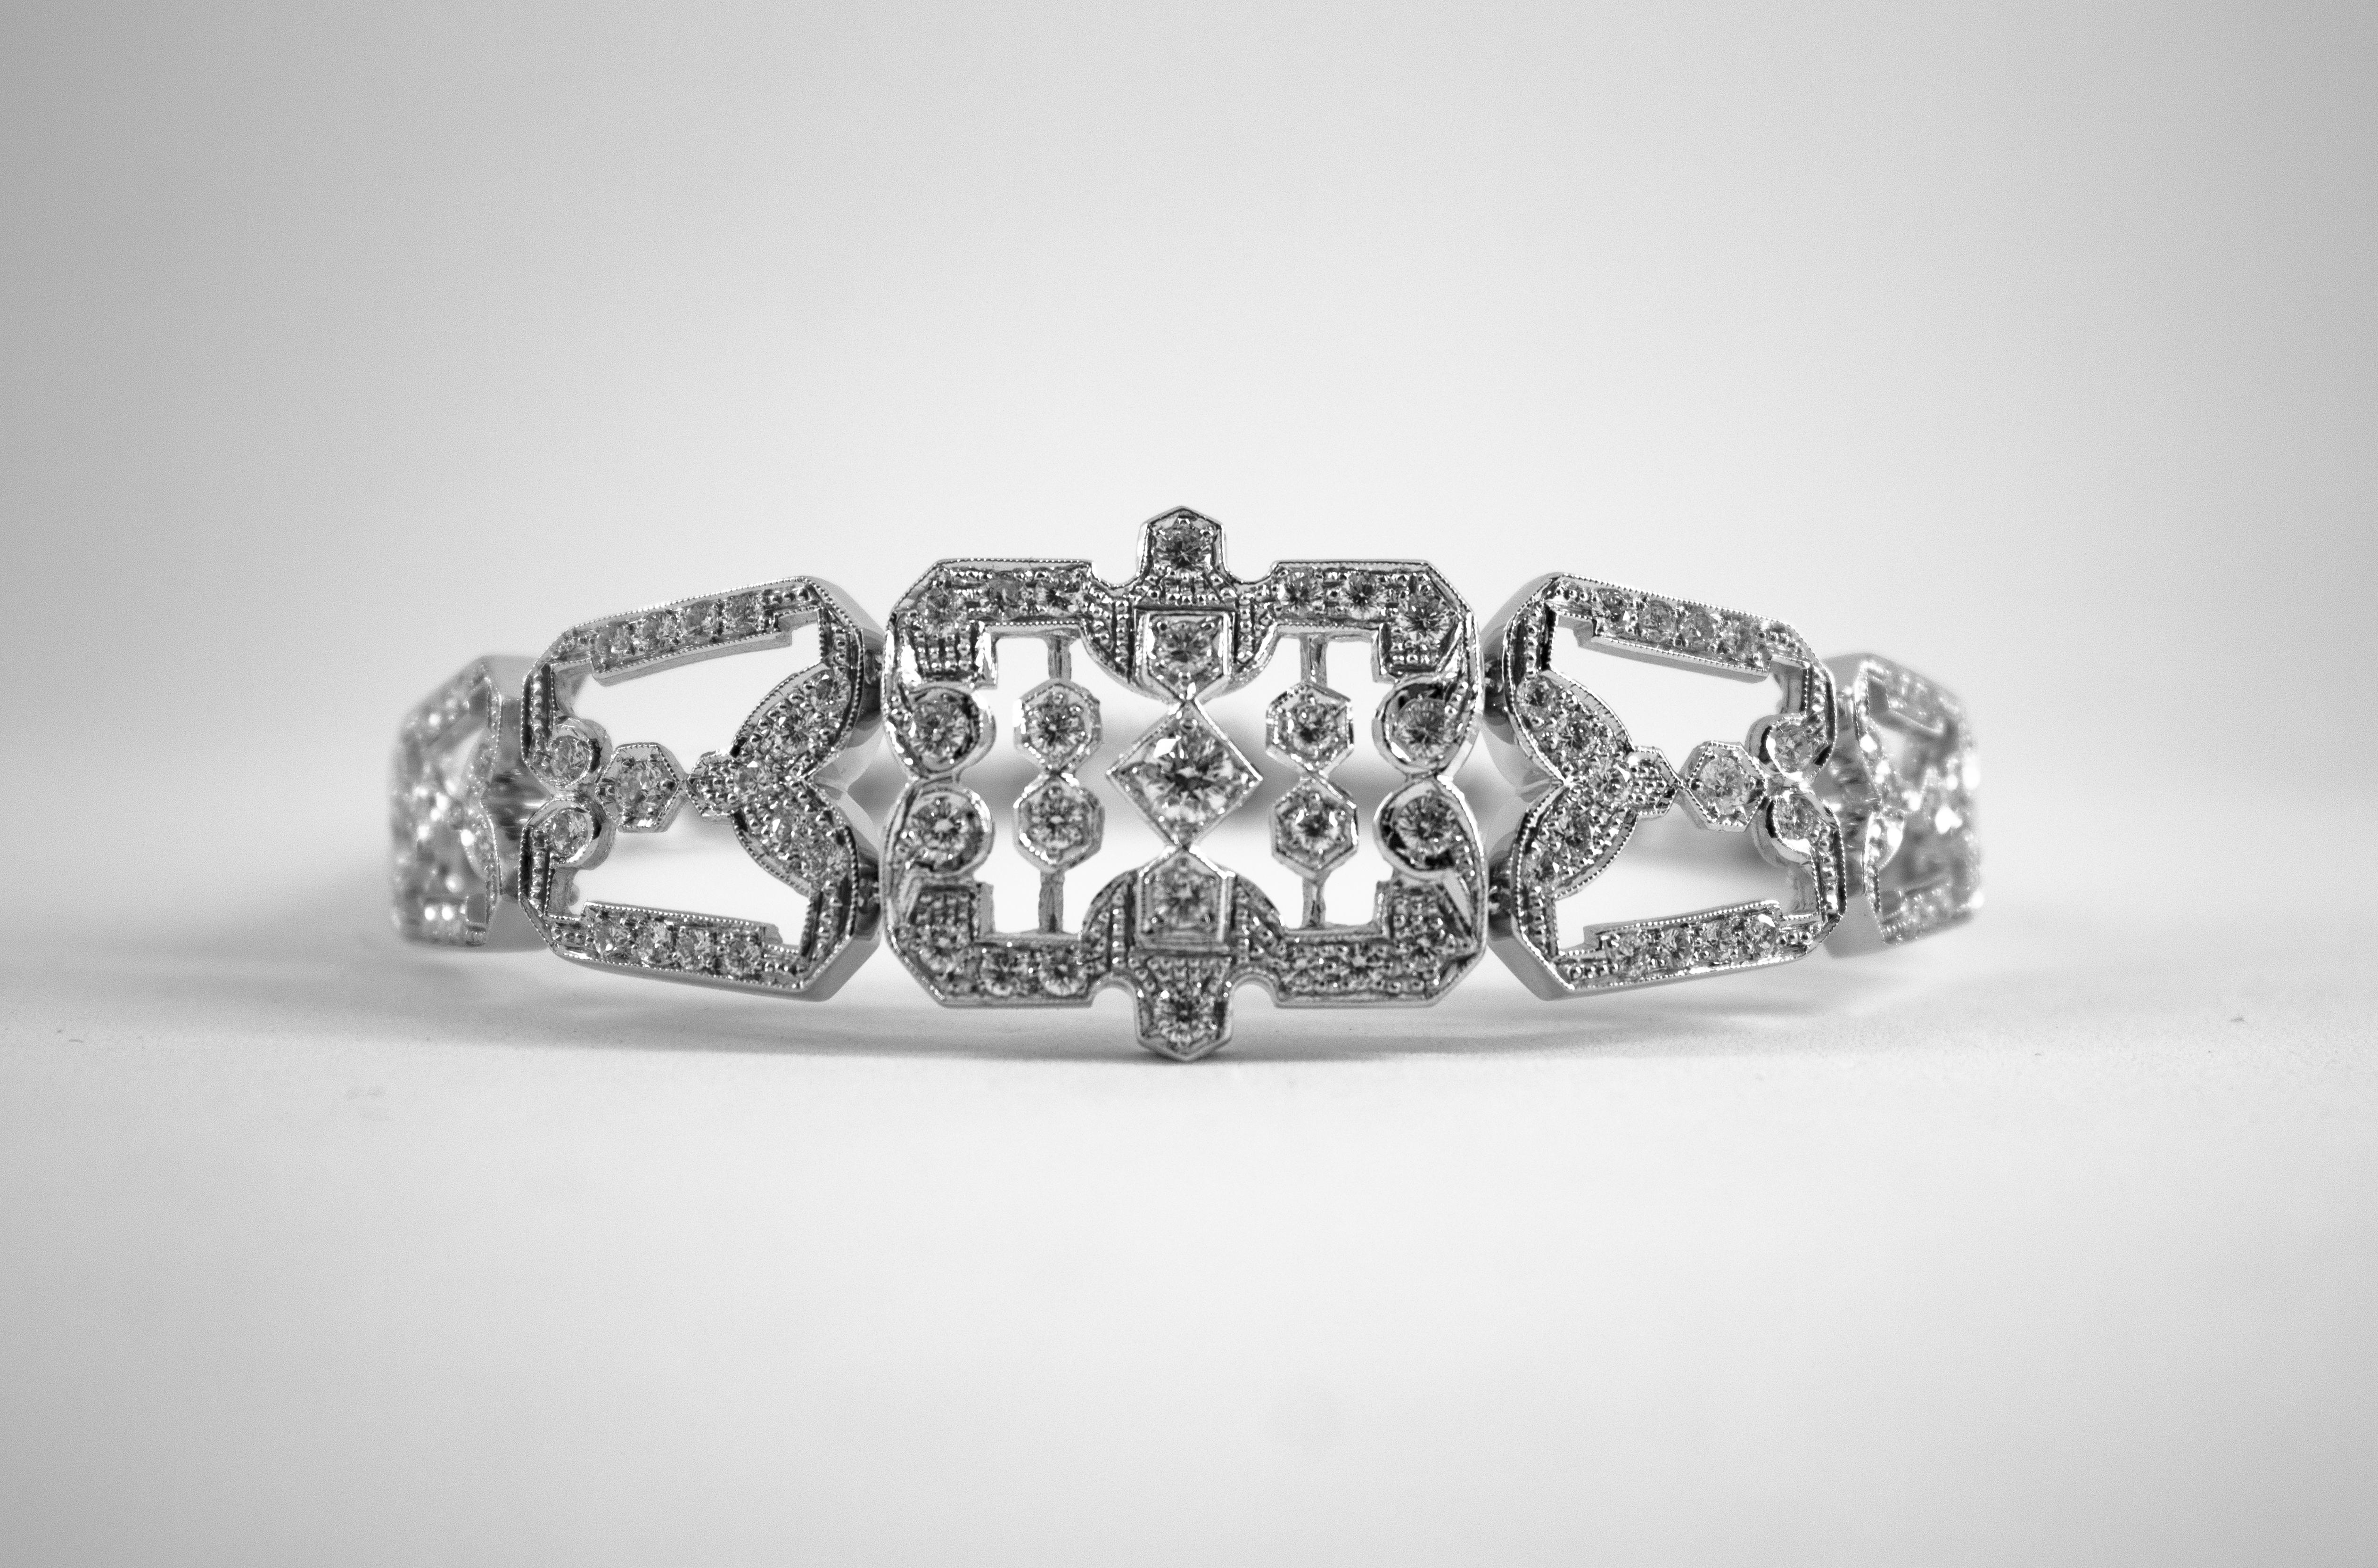 This Bracelet is made of 18K White Gold.
This Bracelet has 2.40 Carats of White Diamonds.
This Bracelet is inspired by Renaissance Style.
We're a workshop so every piece is handmade, customizable and resizable.